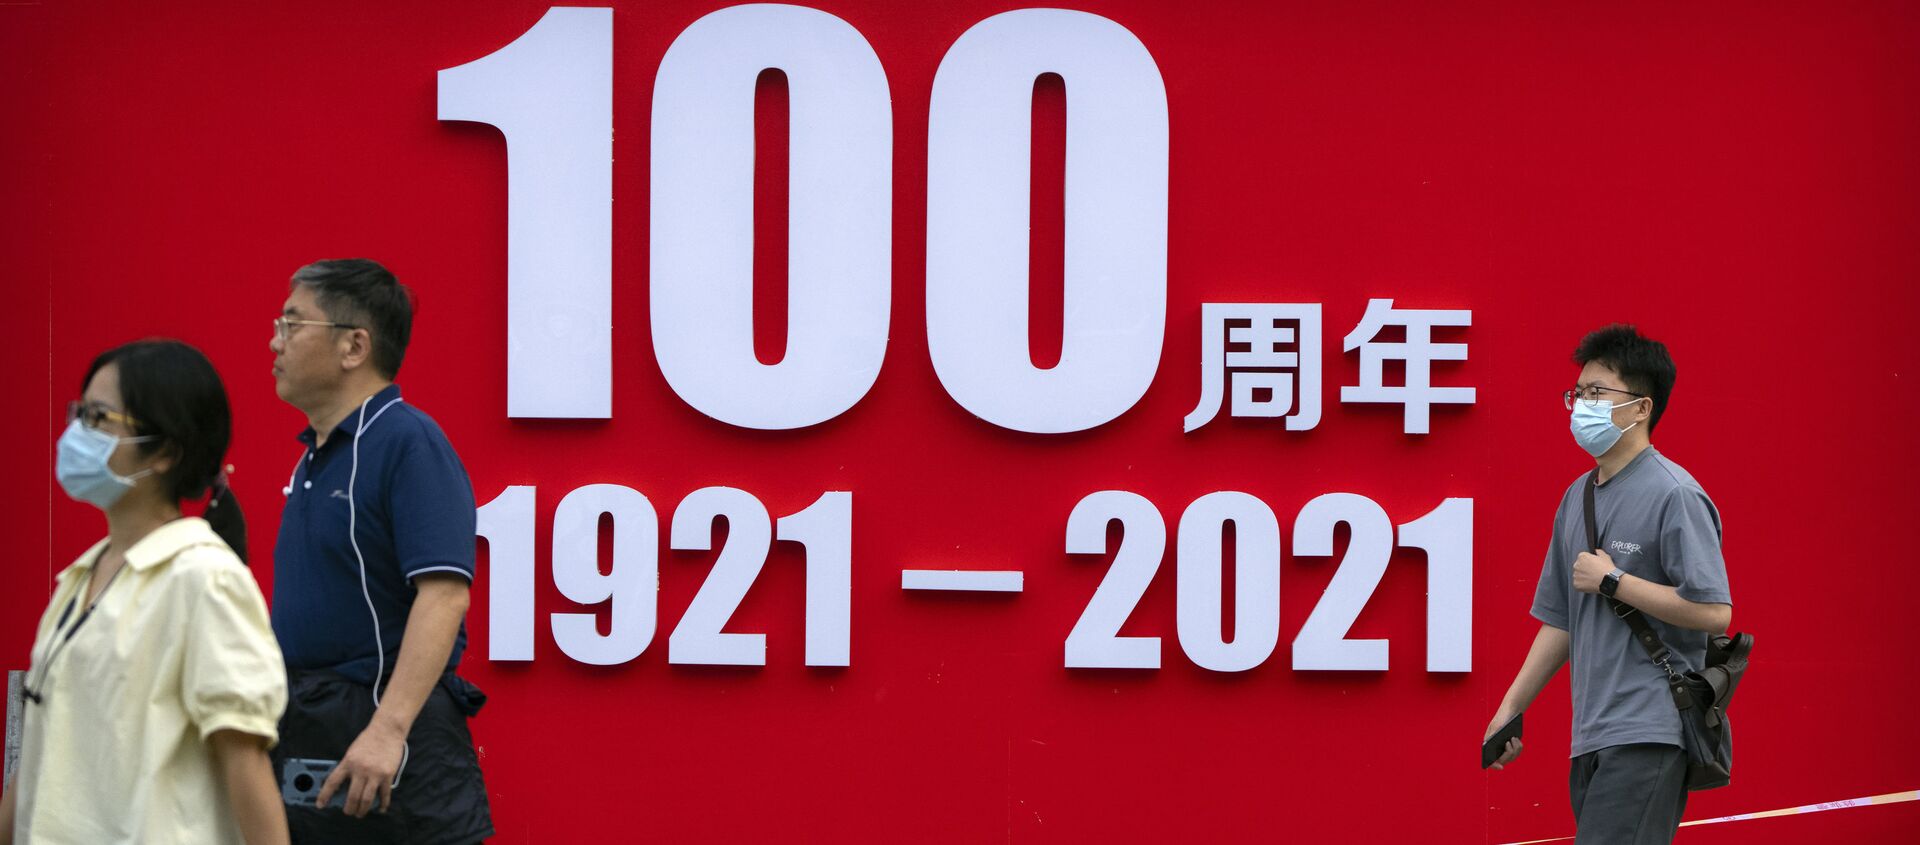 the 100th anniversary of the founding of the Communist Party of China - 俄罗斯卫星通讯社, 1920, 20.07.2021